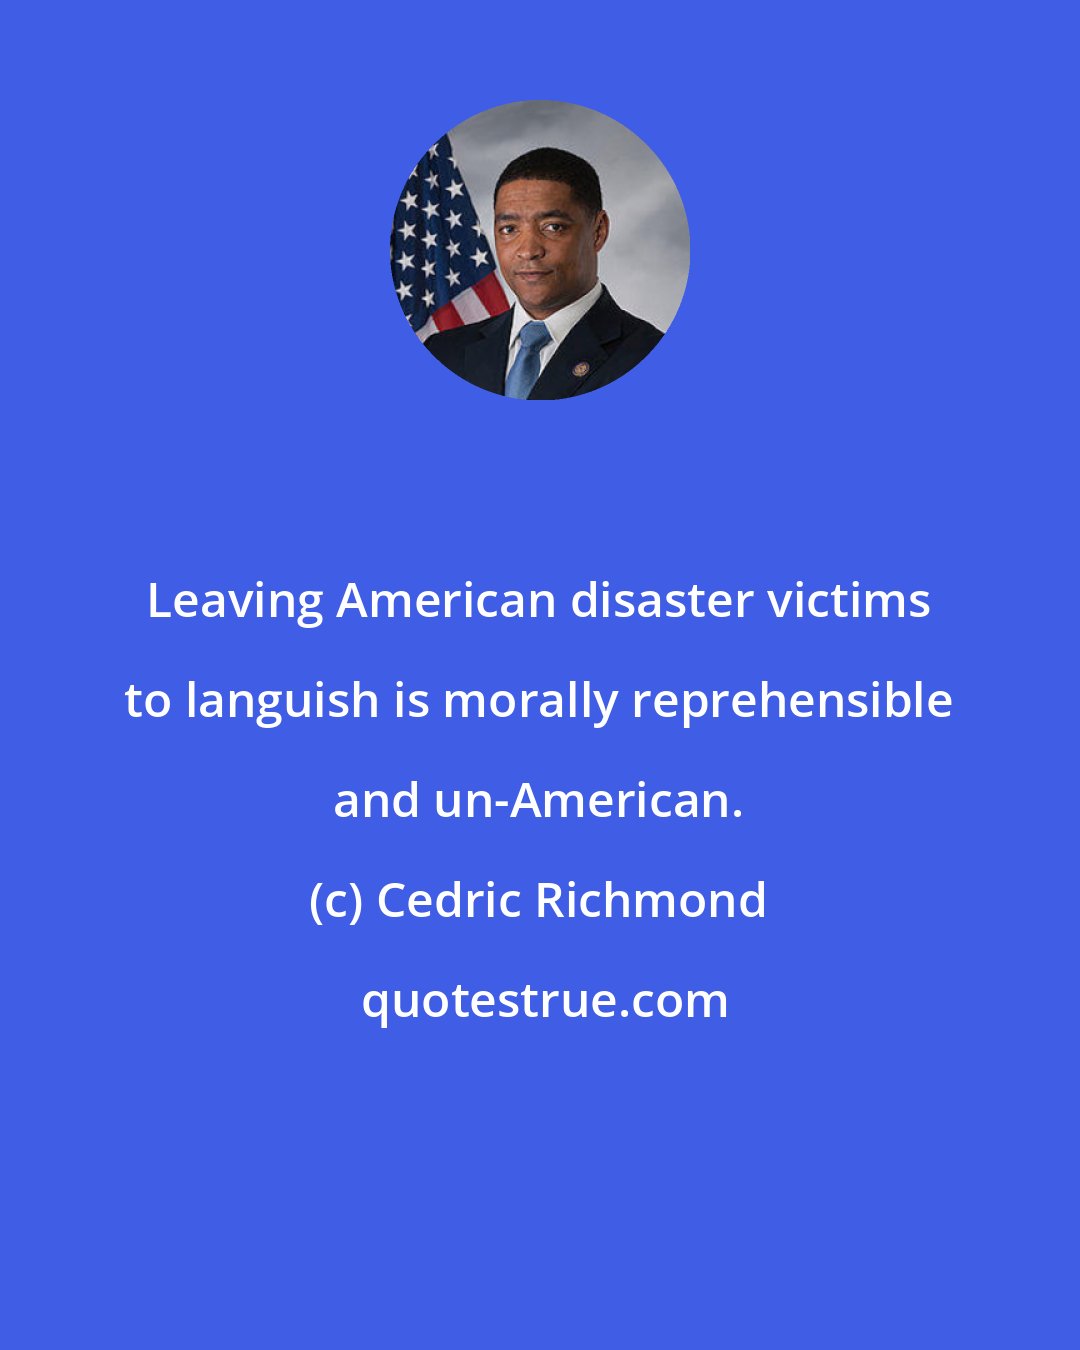 Cedric Richmond: Leaving American disaster victims to languish is morally reprehensible and un-American.